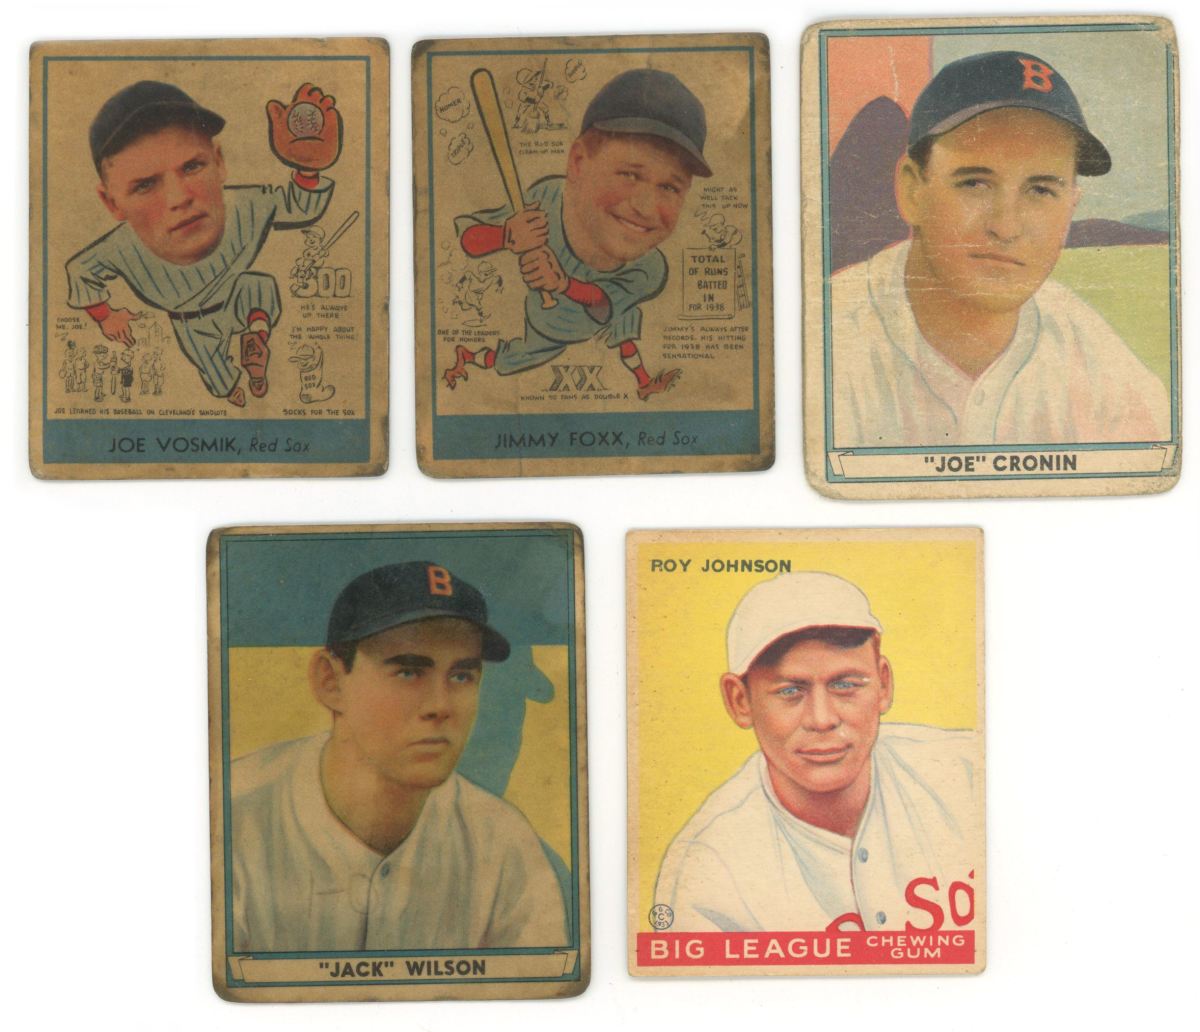 Play Ball and Goudey cards from the 1930 and ‘40s at JG Limited.